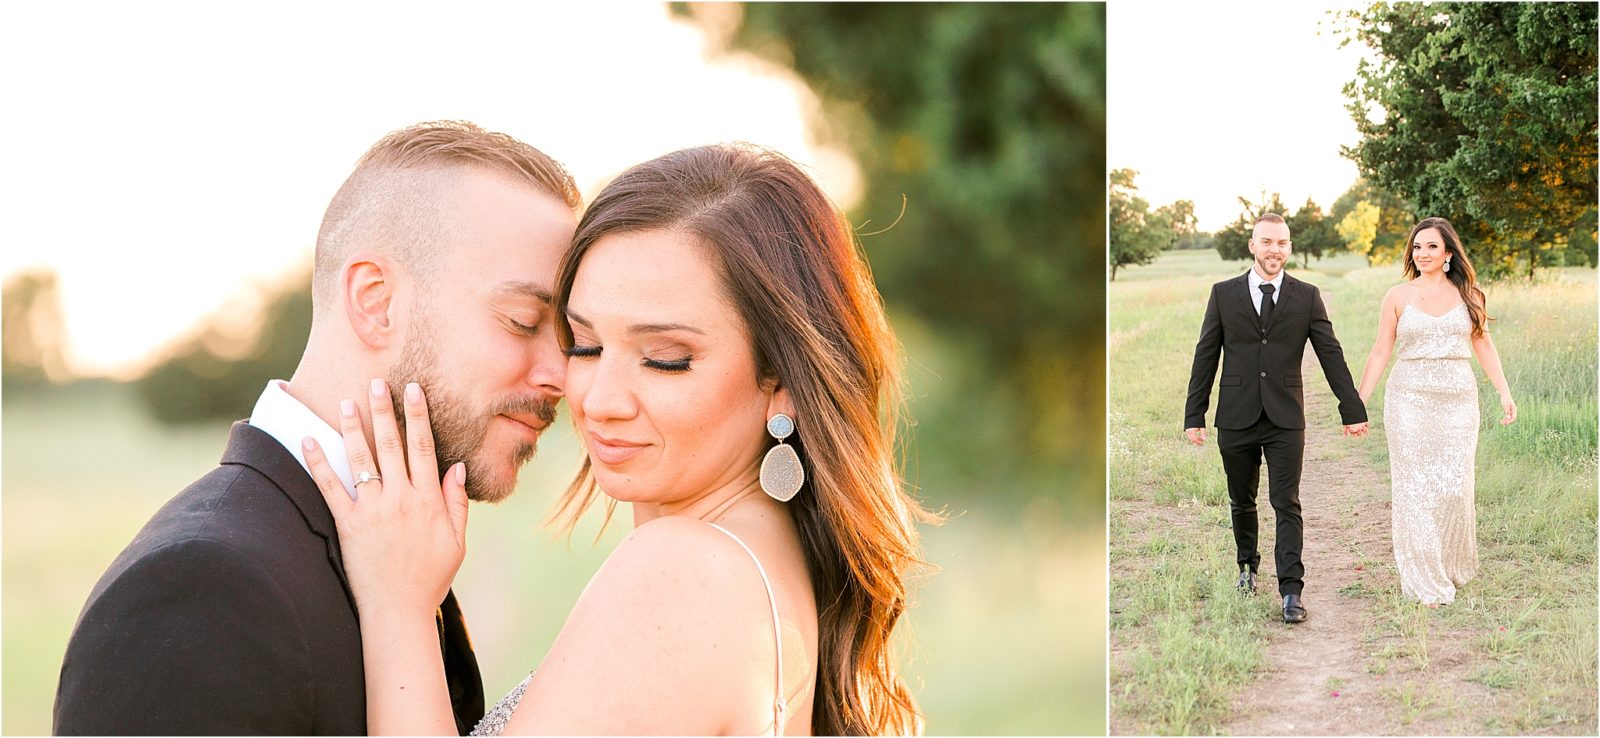 Romantic Outdoor DFW Engagement Session in McKinney Texas by Jillian Hogan Photography